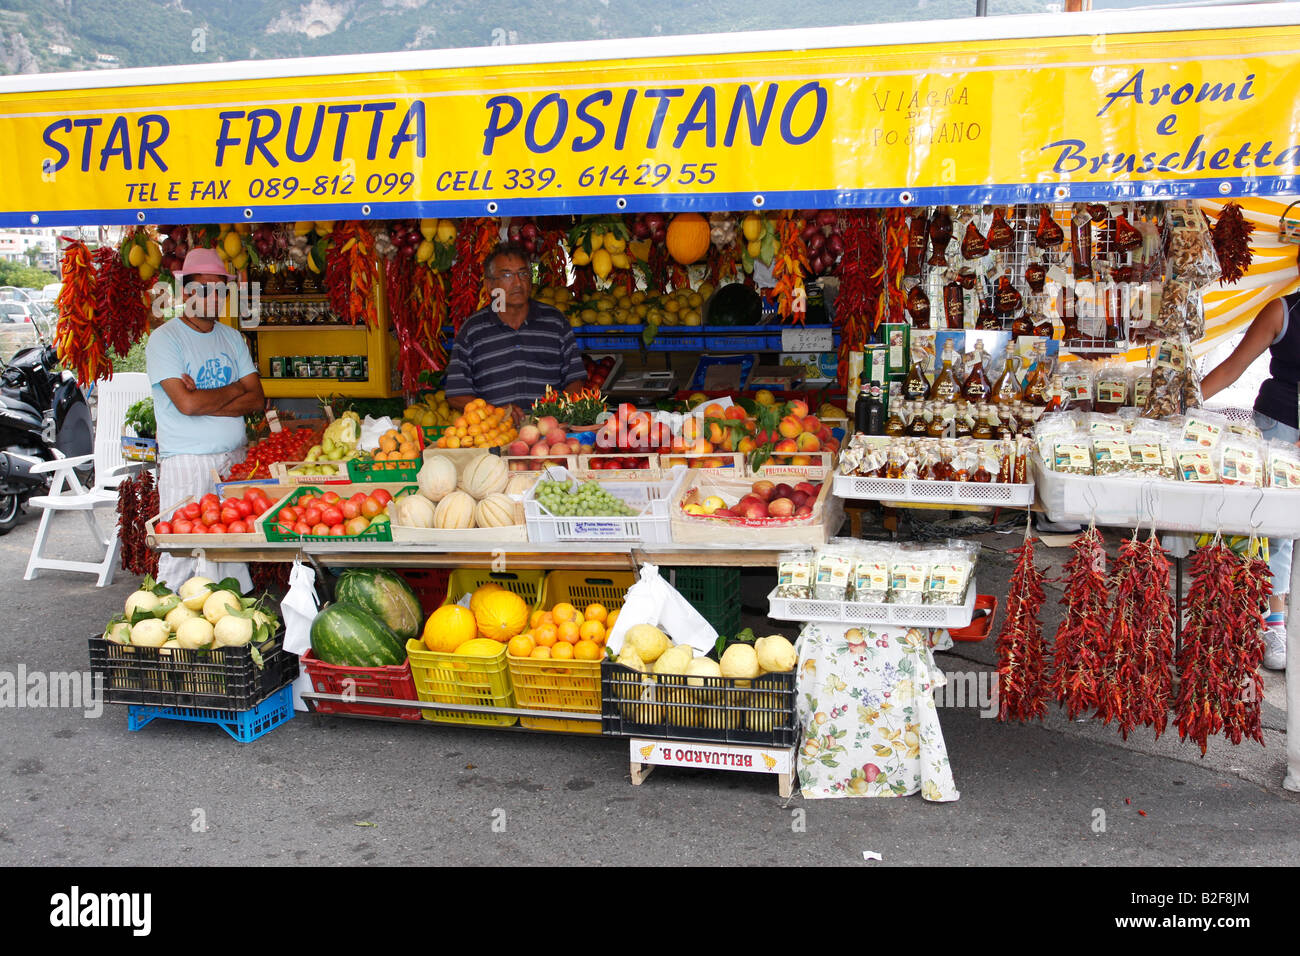 Fruit stall selling fresh produce and hot chilli viagra olive oil. Stock Photo